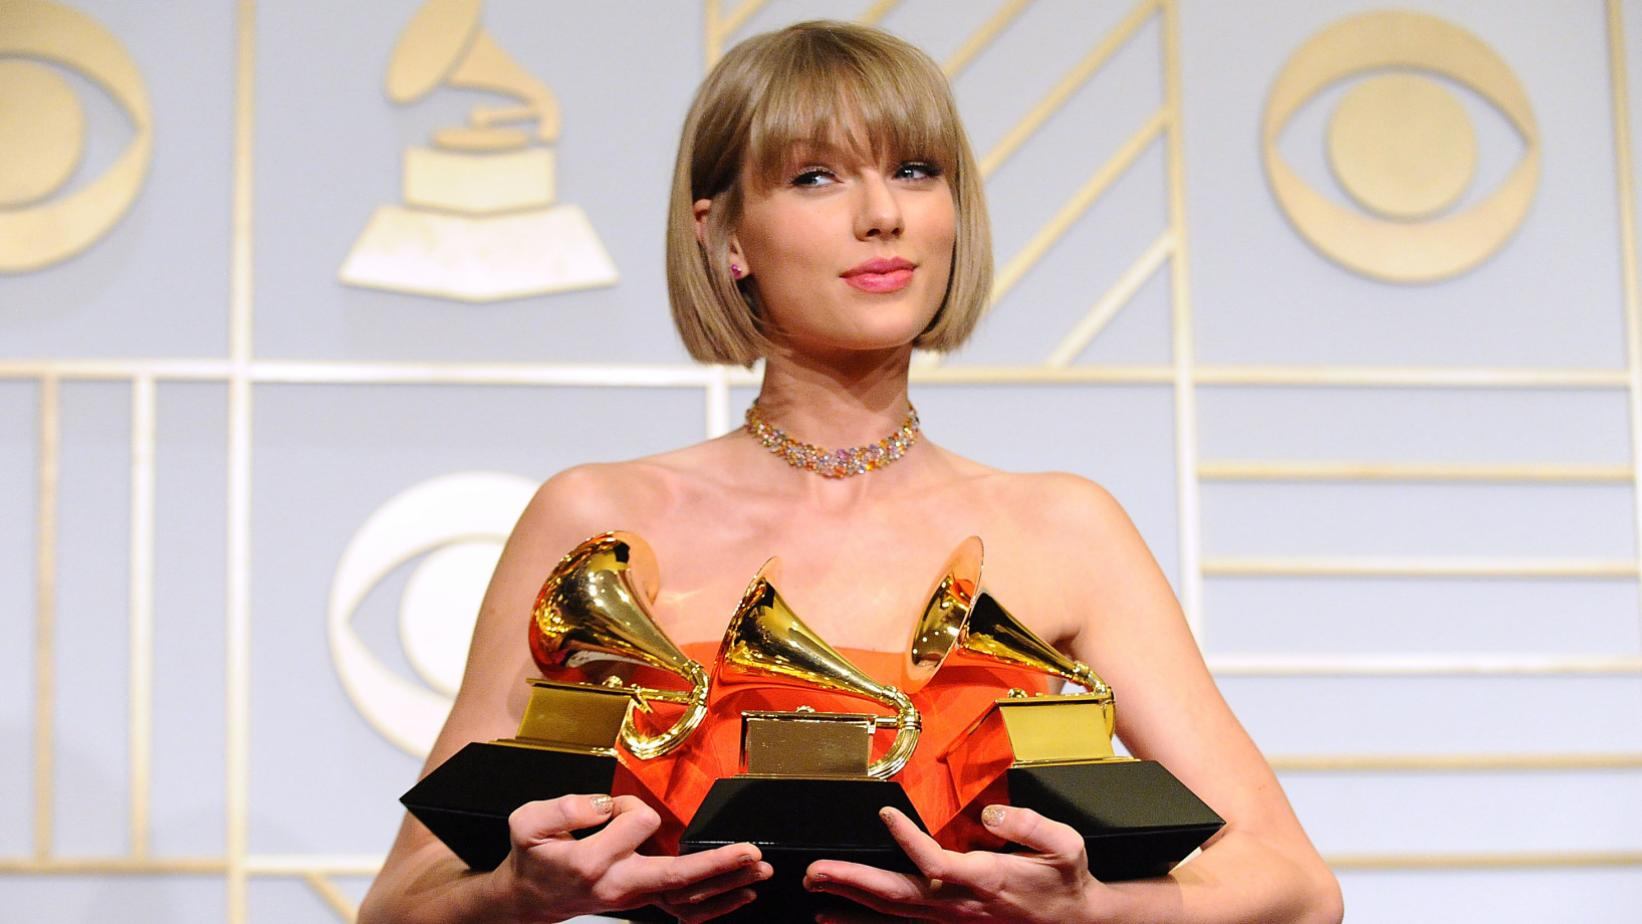 How Taylor Swift Went from Country to Pop and Became One of the Biggest Artists Today